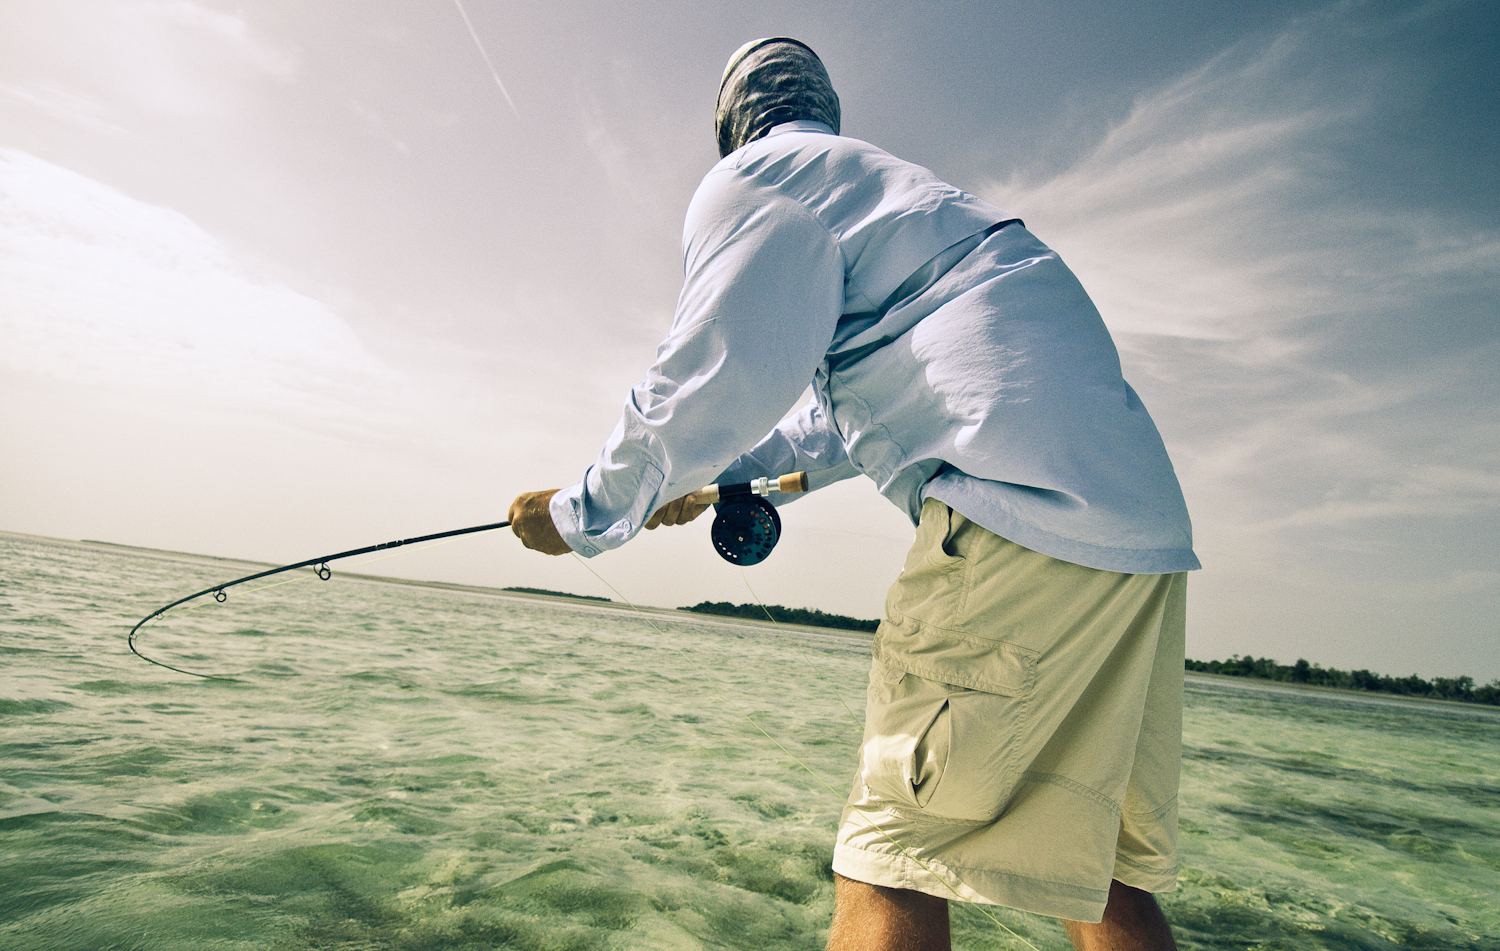 Winter-Time Fishing in the Florida Keys - SCOF - Southern Culture